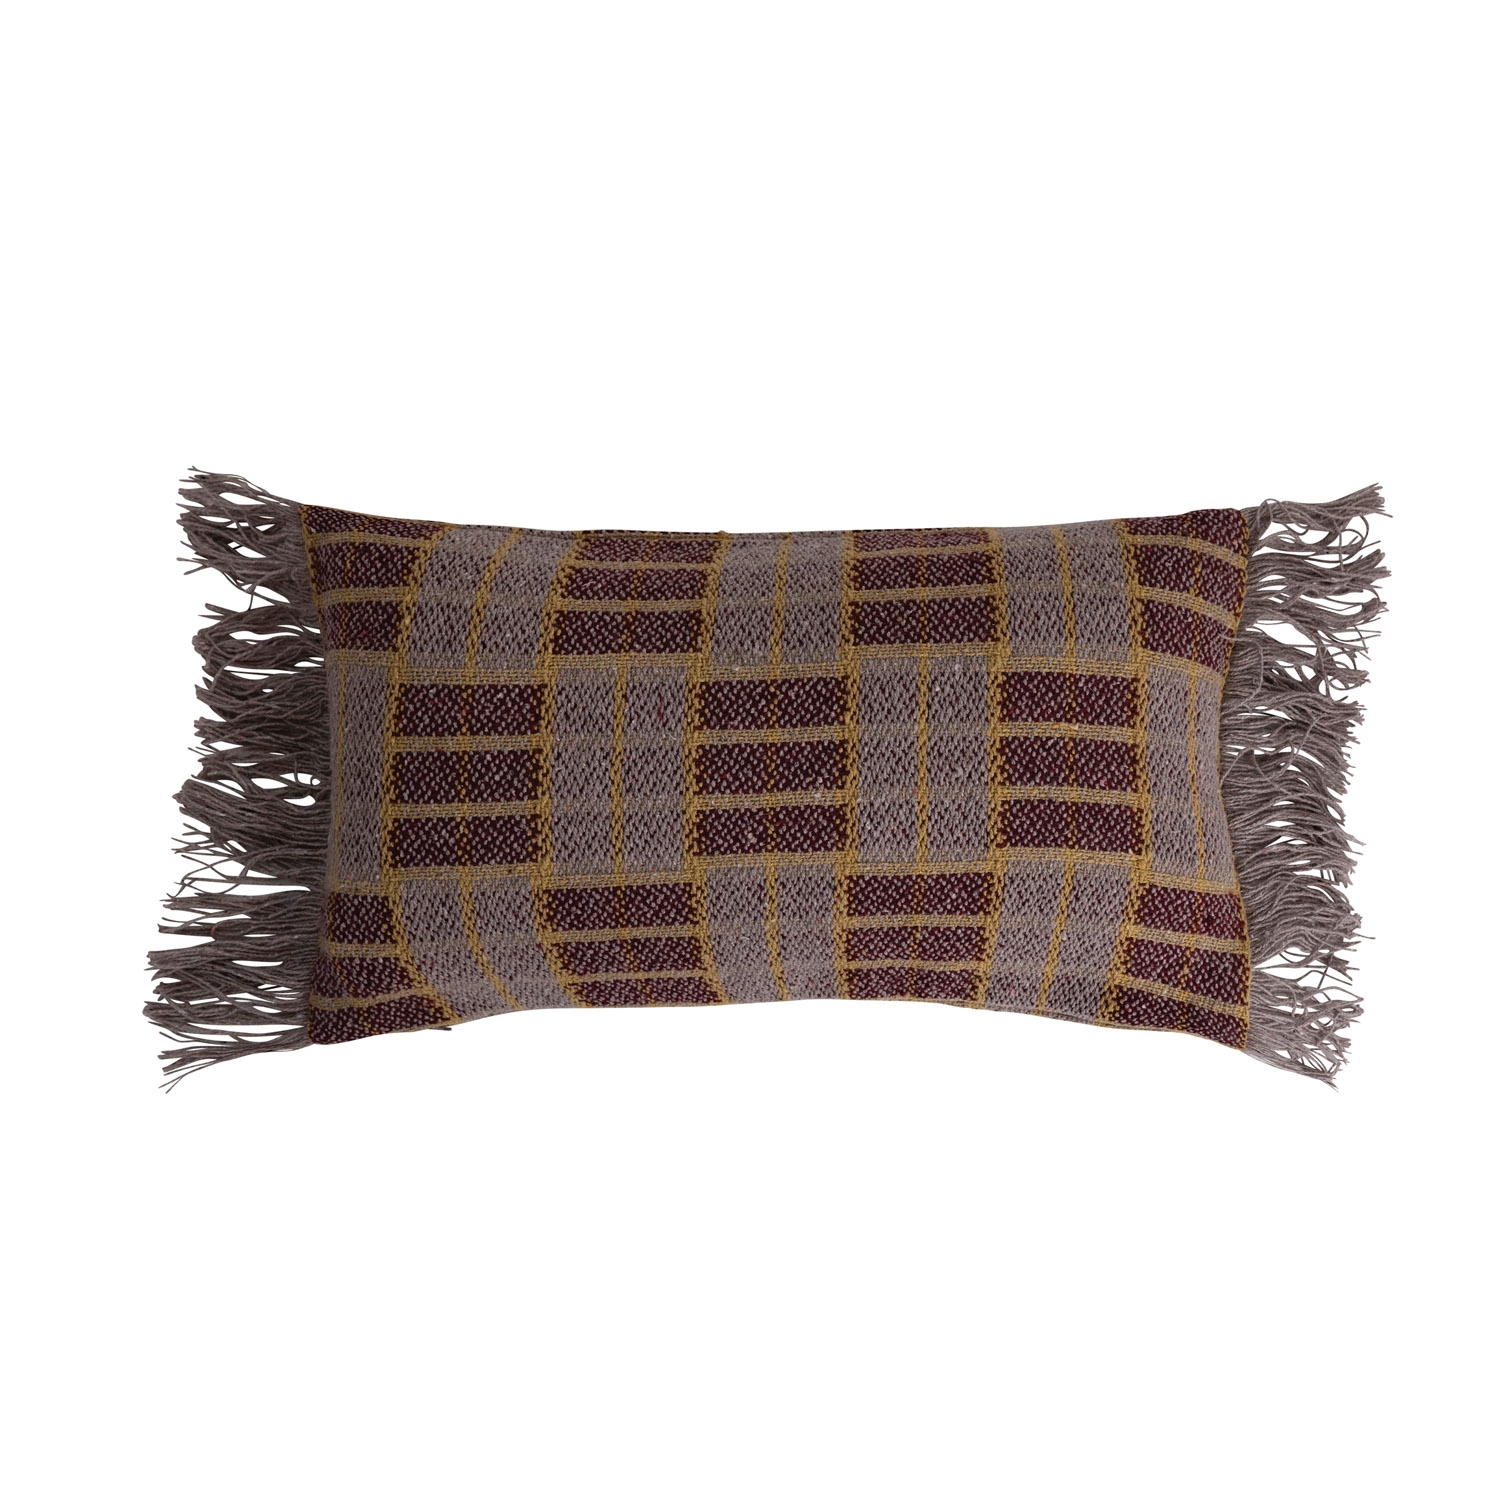 Woven Recycled Cotton Blend Lumbar Pillow with Fringe - Image 0